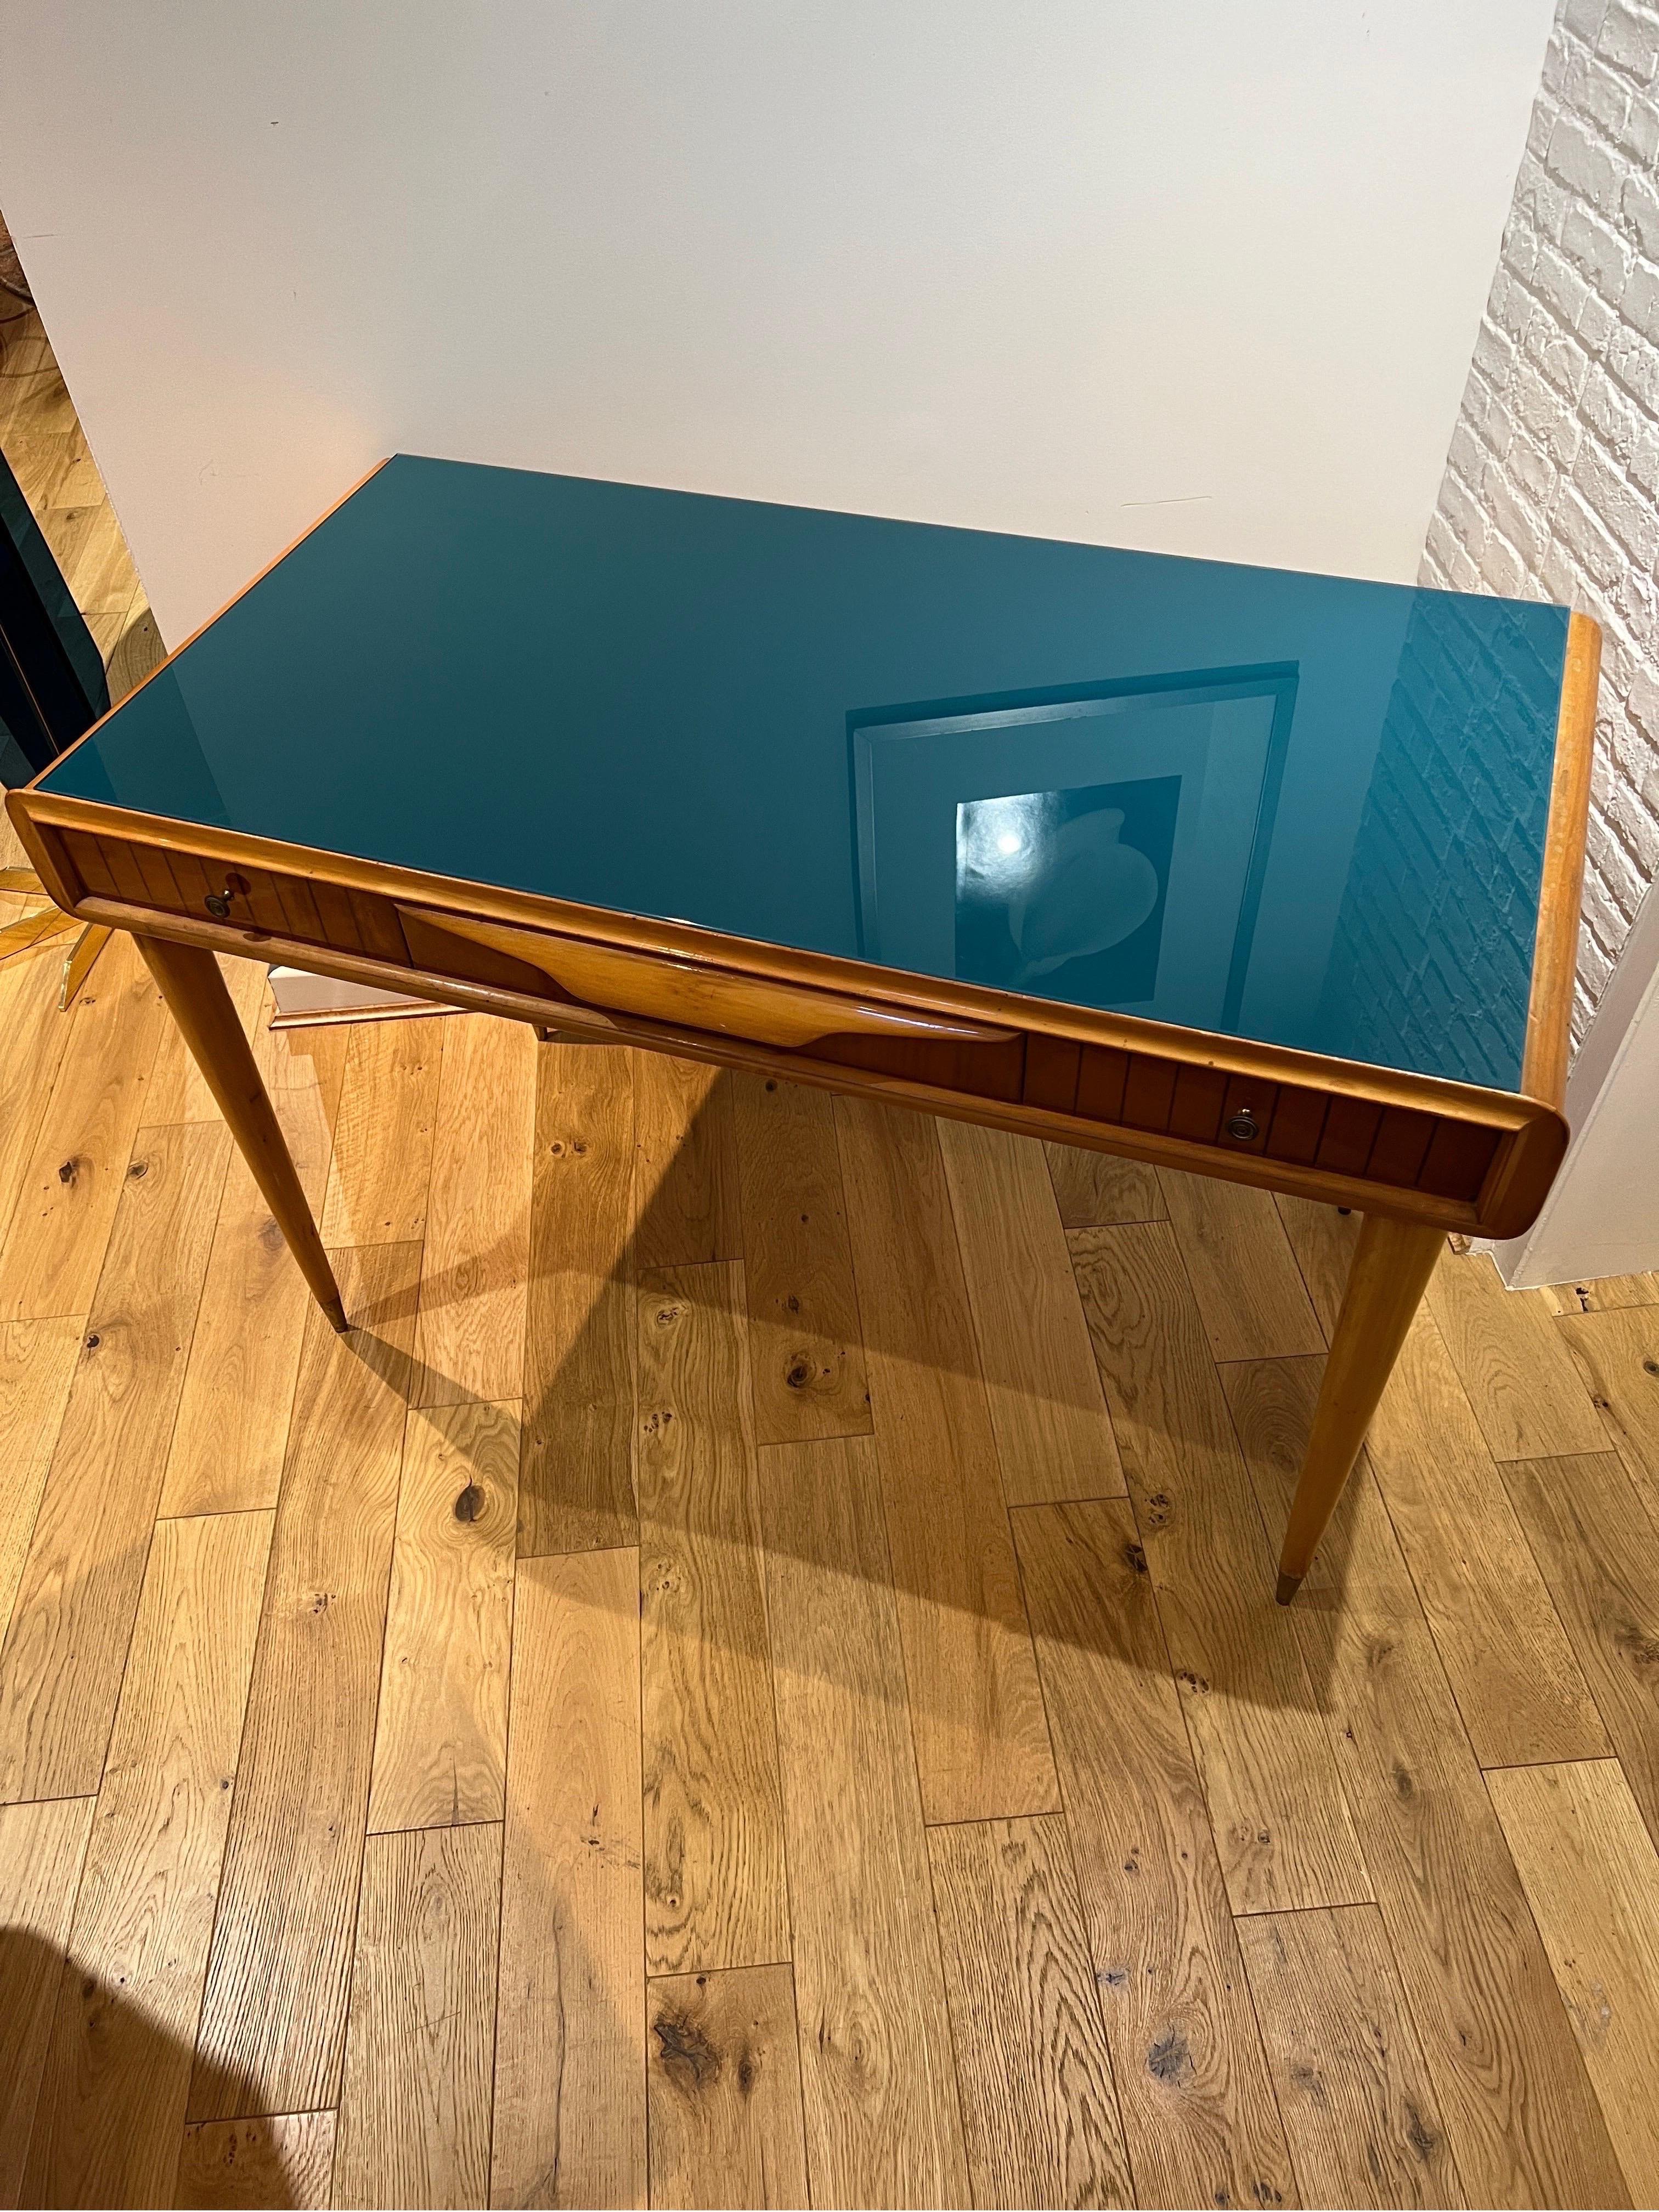 A 1950s Italian 3 drawers desk in cherrywood with laminated stripe detailing on the front and a beautiful blue glass on top . Brass handles and brass sabots on the legs . This elegant & versatile piece can also be used as a console or a vanity table